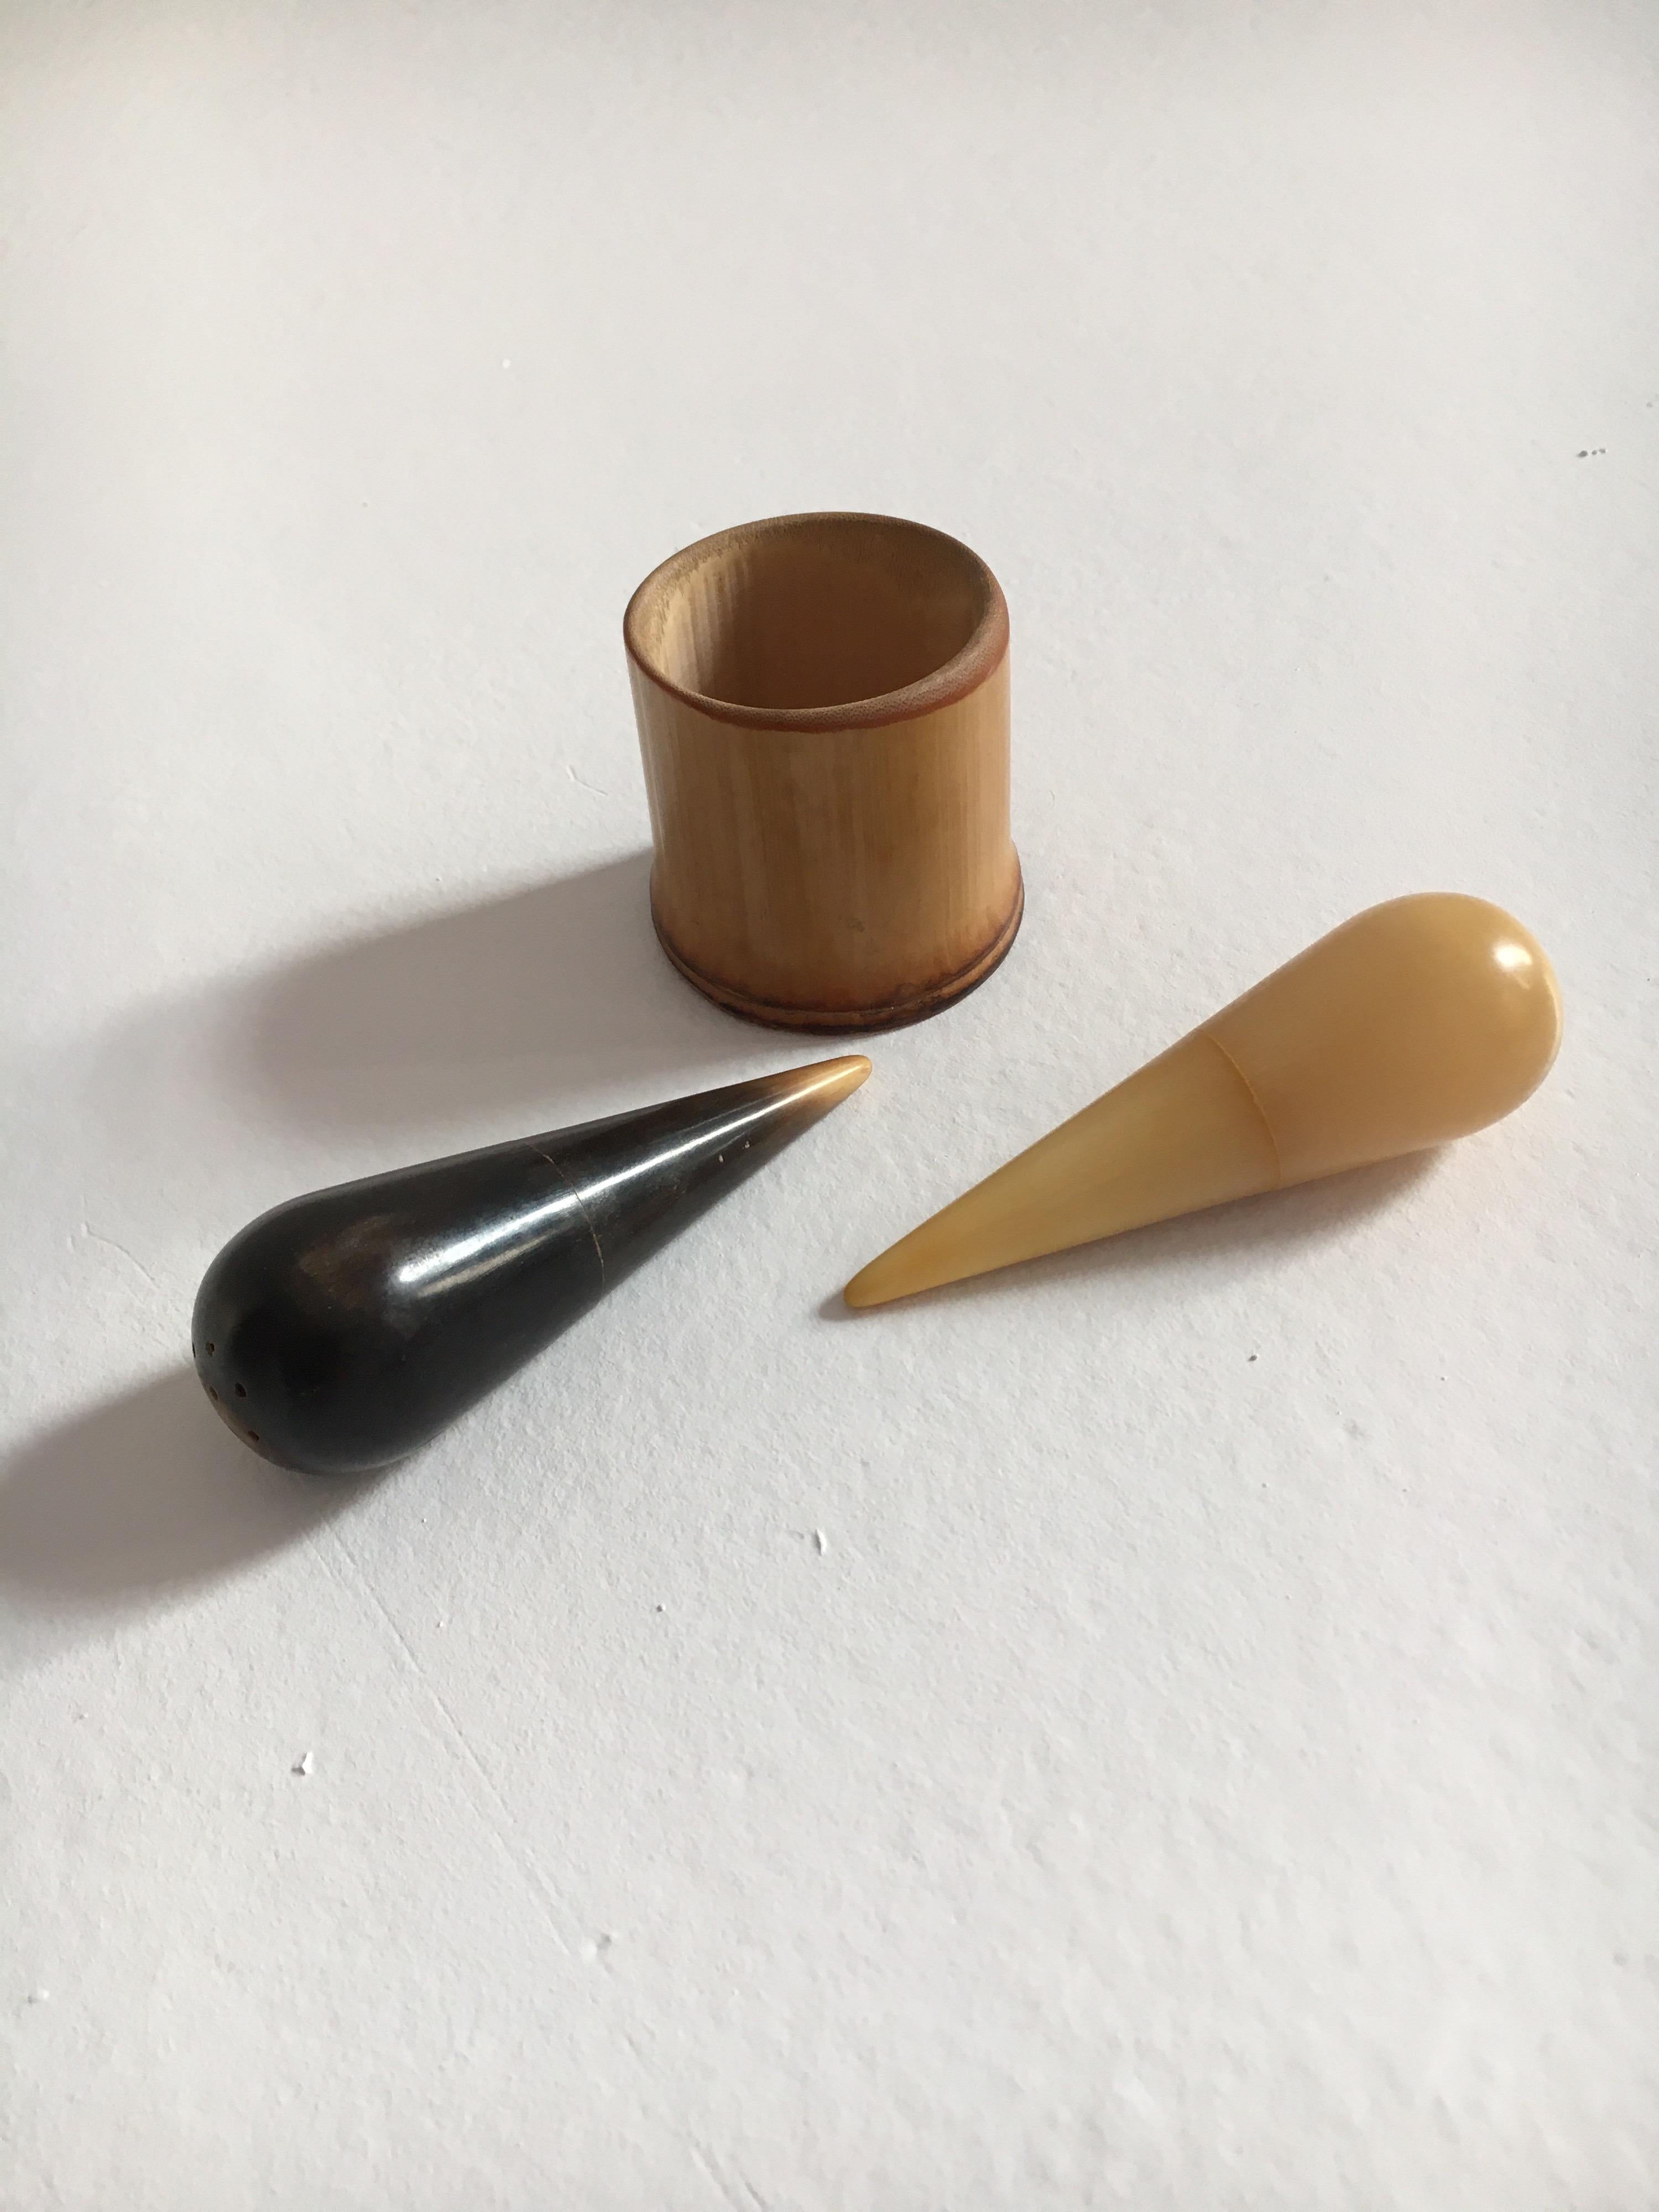 Horn Carl Auböck II. Rare Salt and Pepper Shaker in Bamboo Cup, Austria, 1950s For Sale